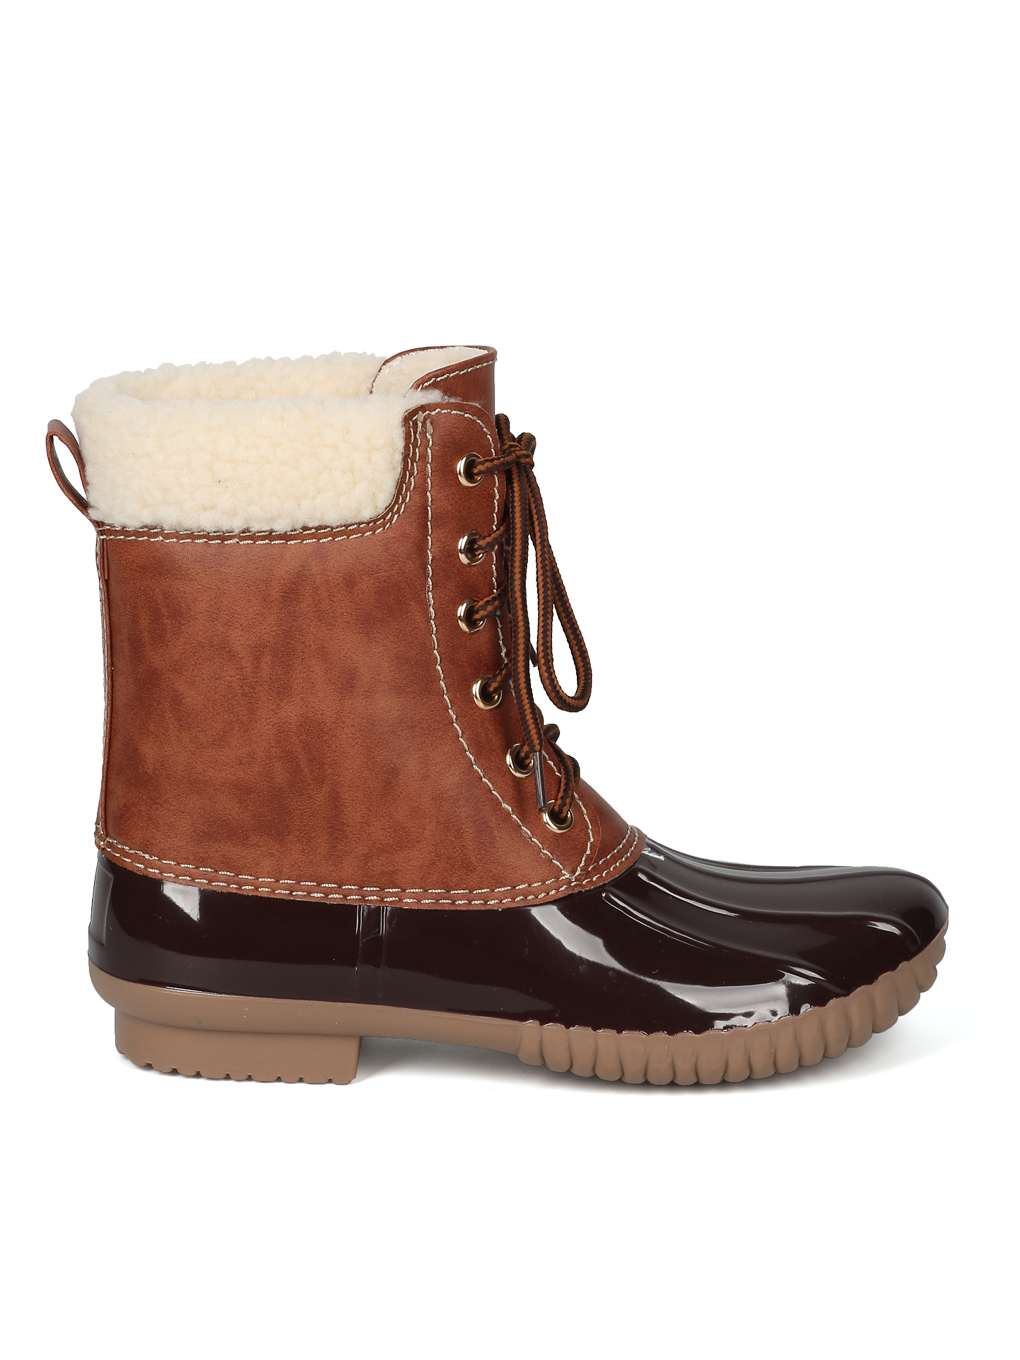 New Women Two Tone Faux Shearling Lined Lace Up Duck Boot - 17990 By Yoki - image 2 of 6